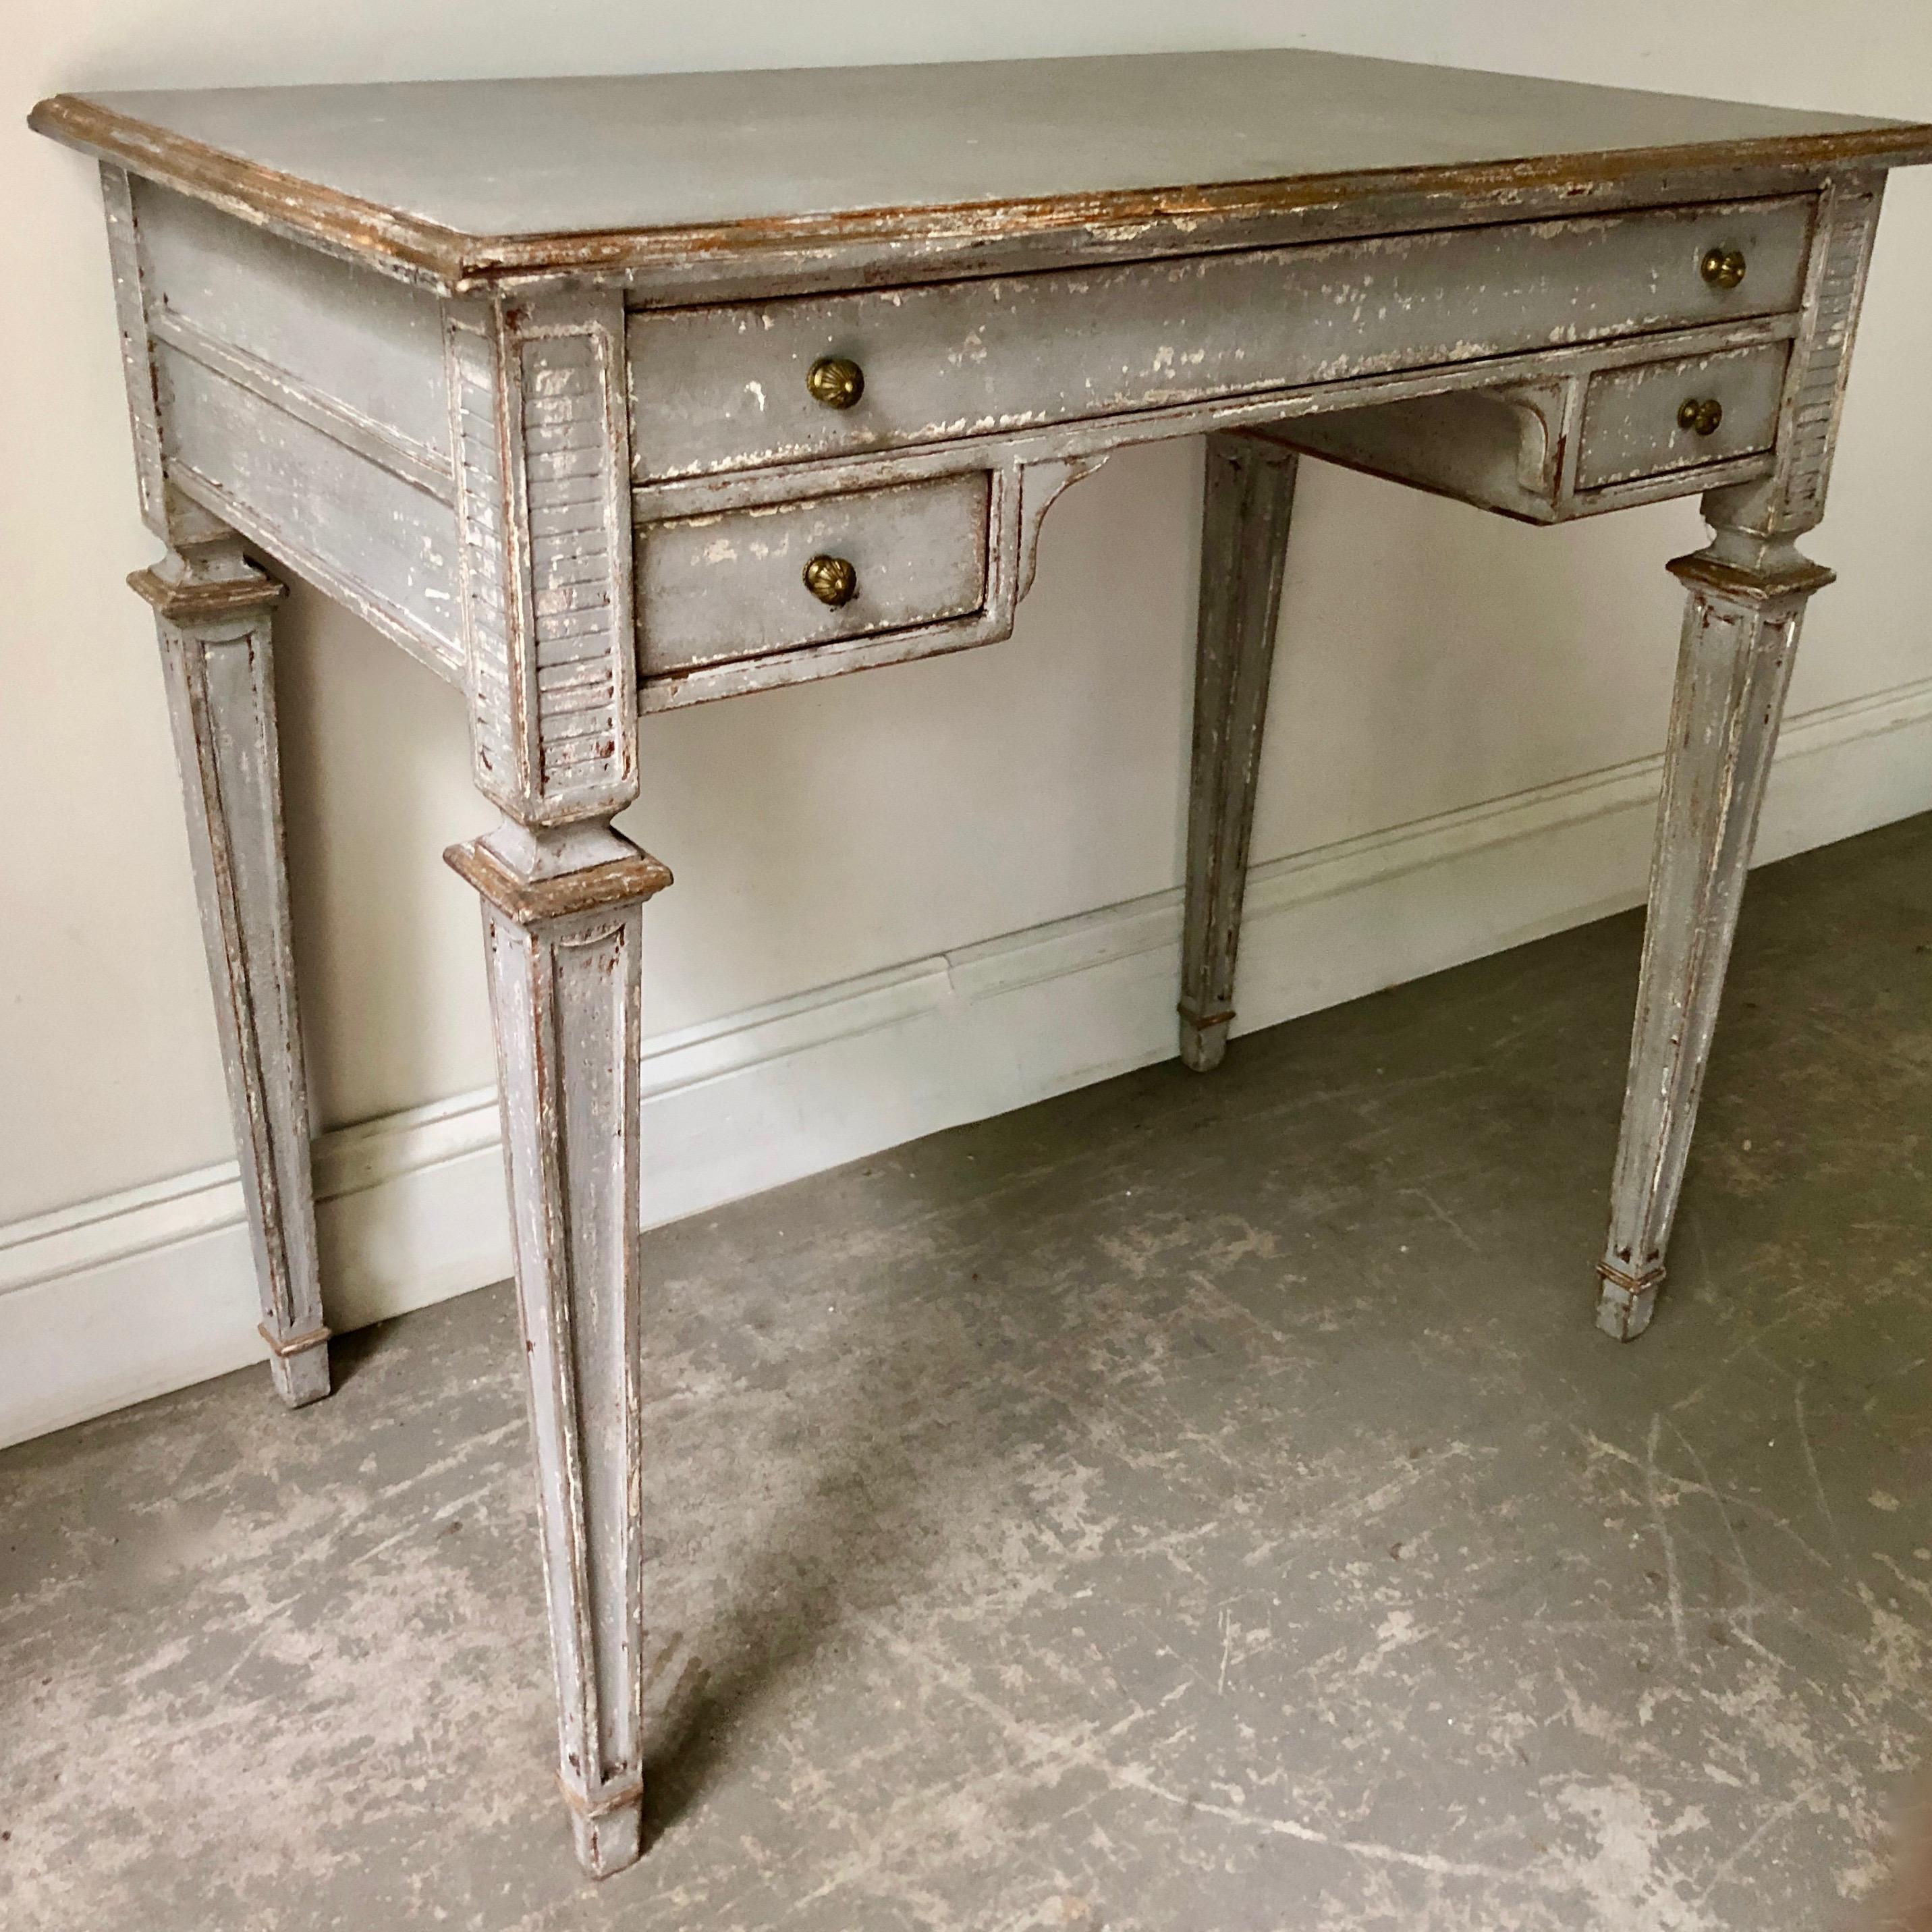 Charming small 19th century French Louis XVI style Bureaux plat with drawers with carved tapered legs.
 